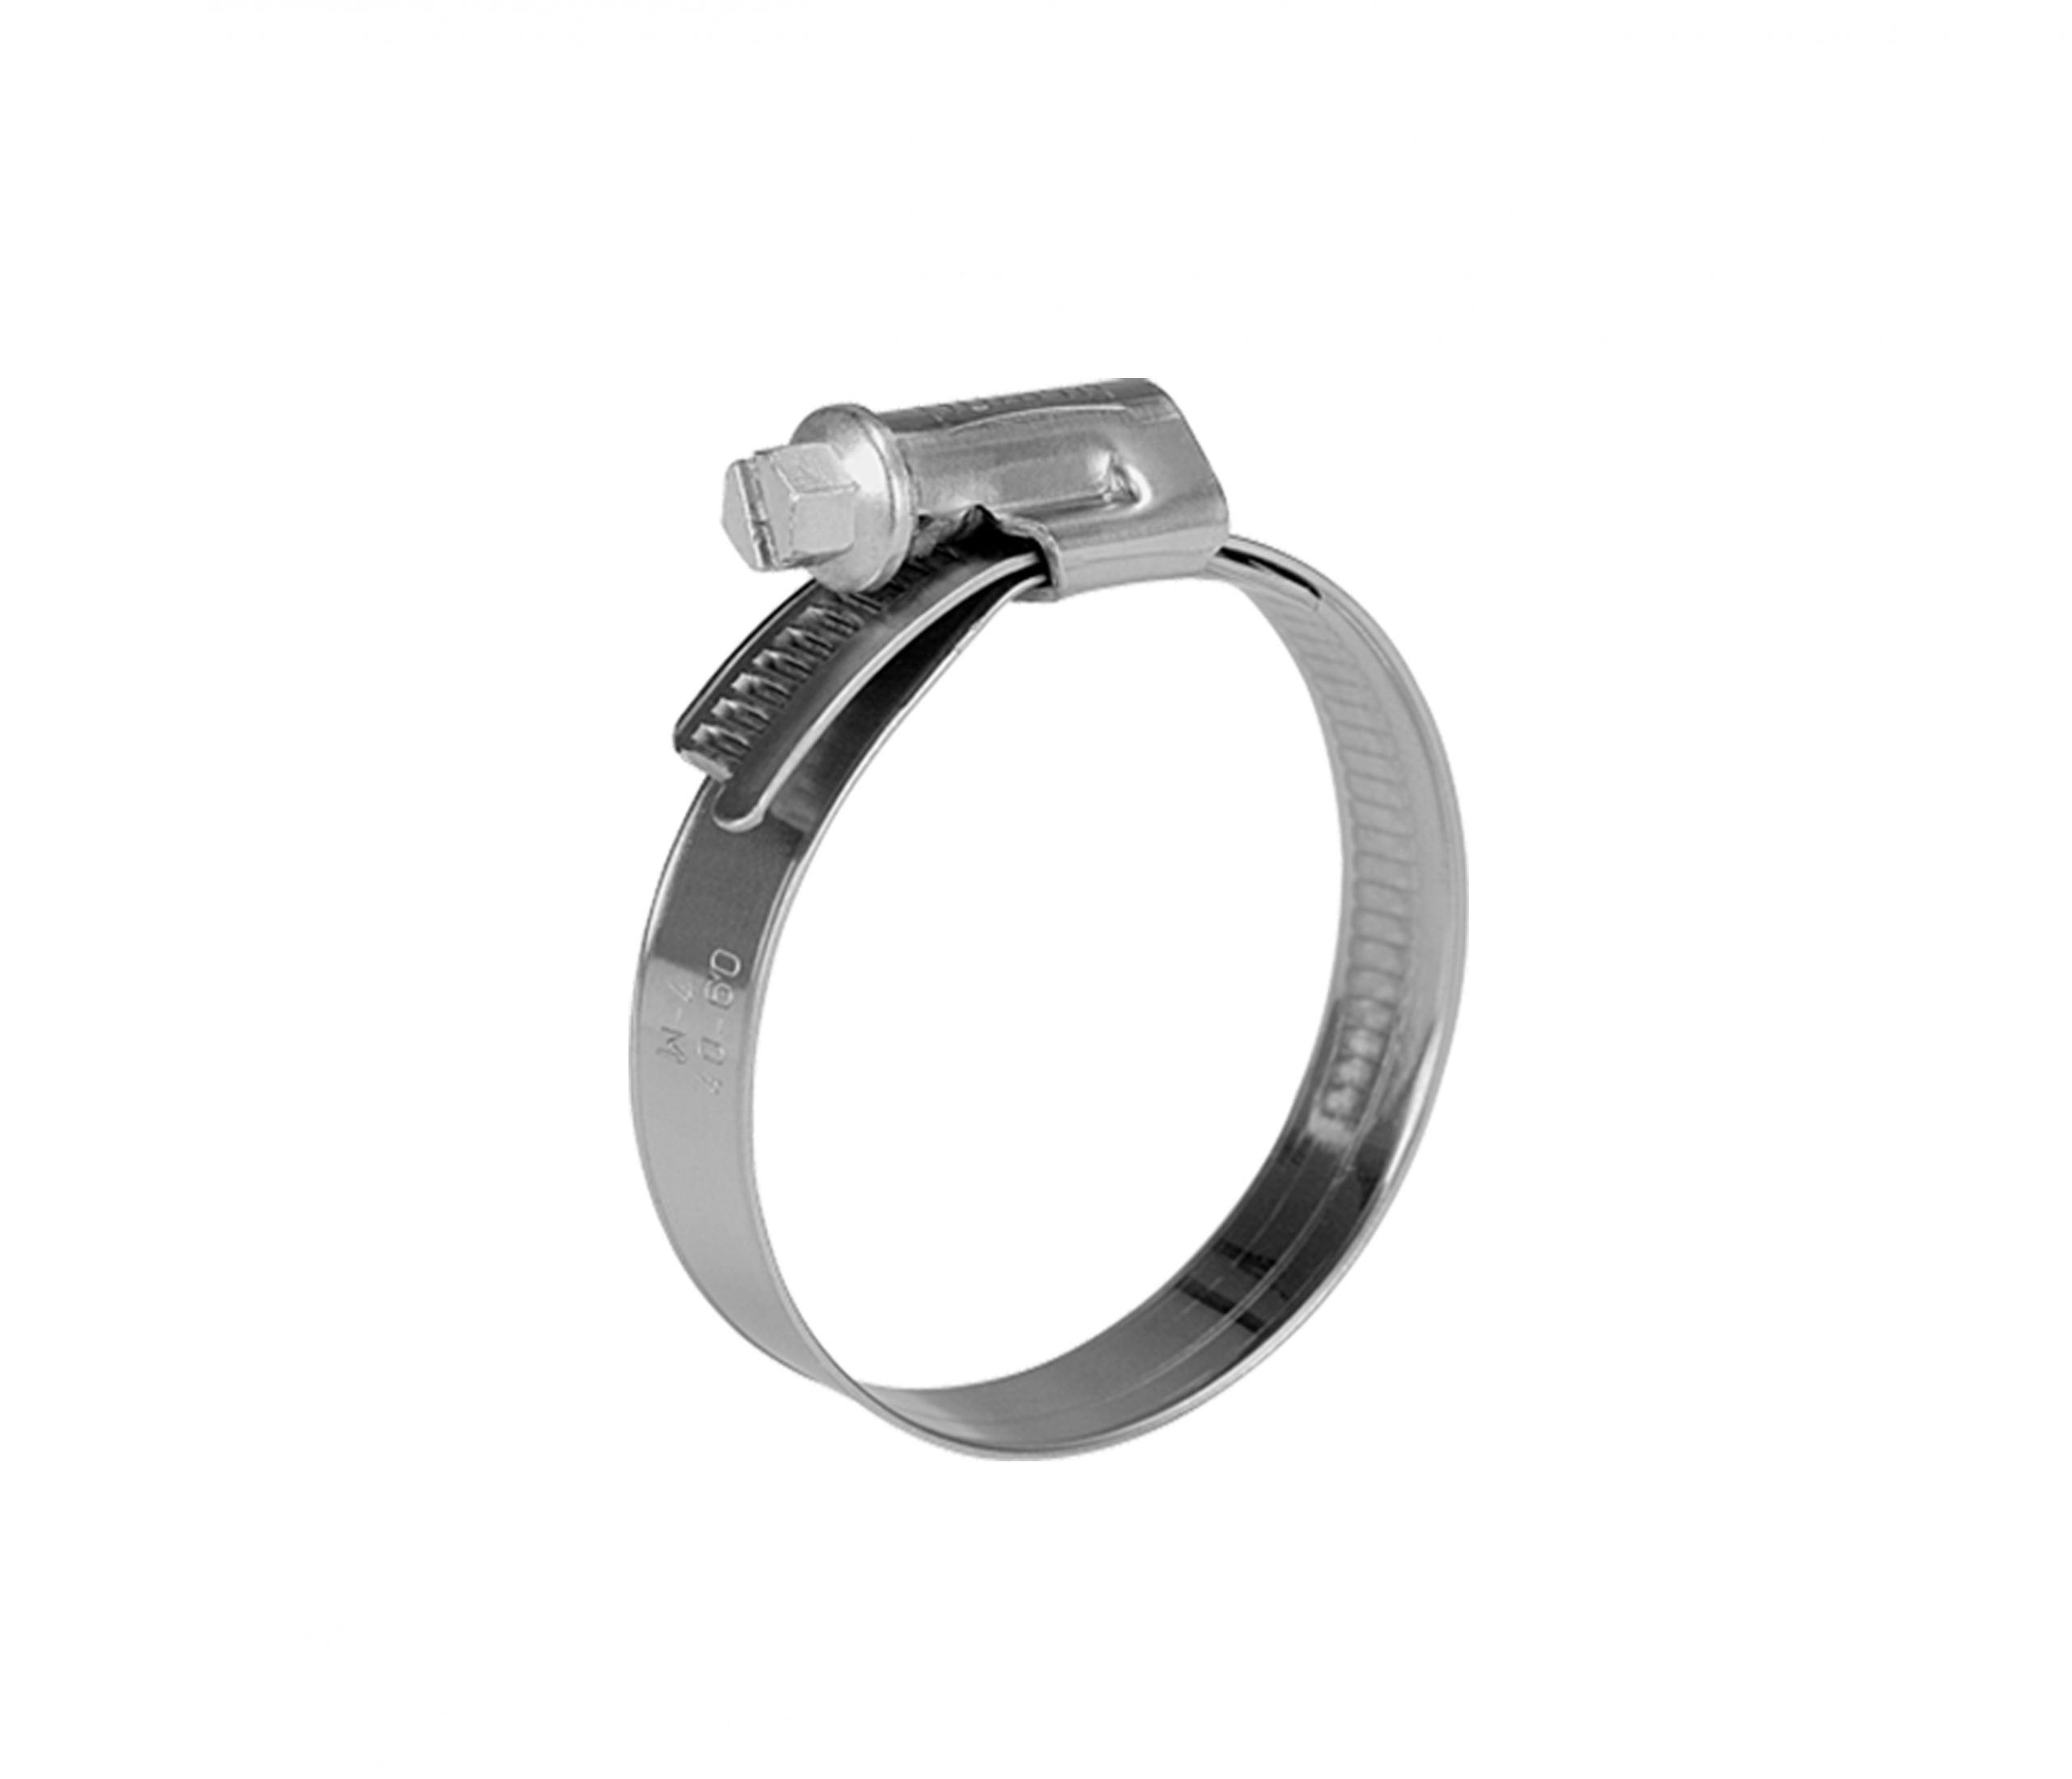 20-32mm Stainless Steel Hose Clamp with Worm Drive 722-2032 by Norma